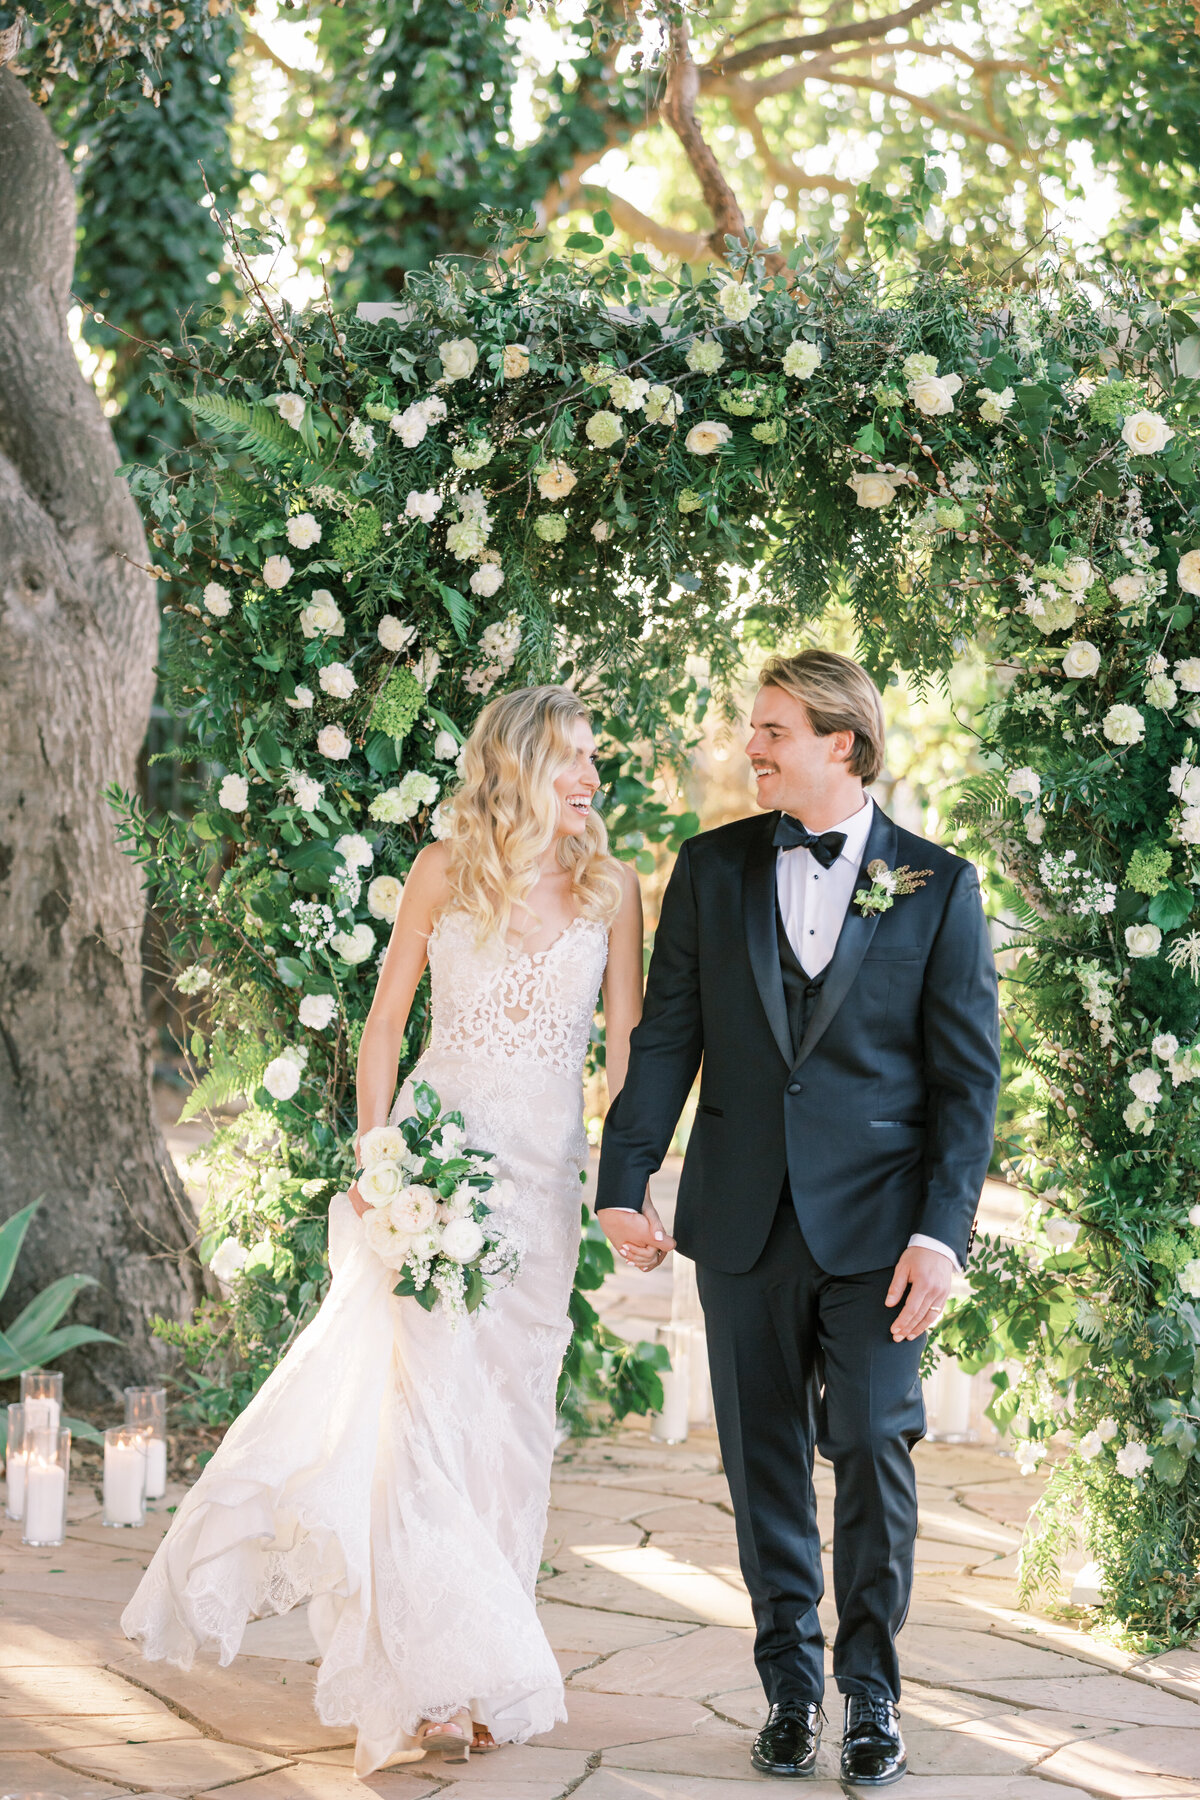 Jocelyn and Spencer Photography California Santa Barbara Wedding Engagement Luxury High End Romantic Imagery Light Airy Fineart Film Style8